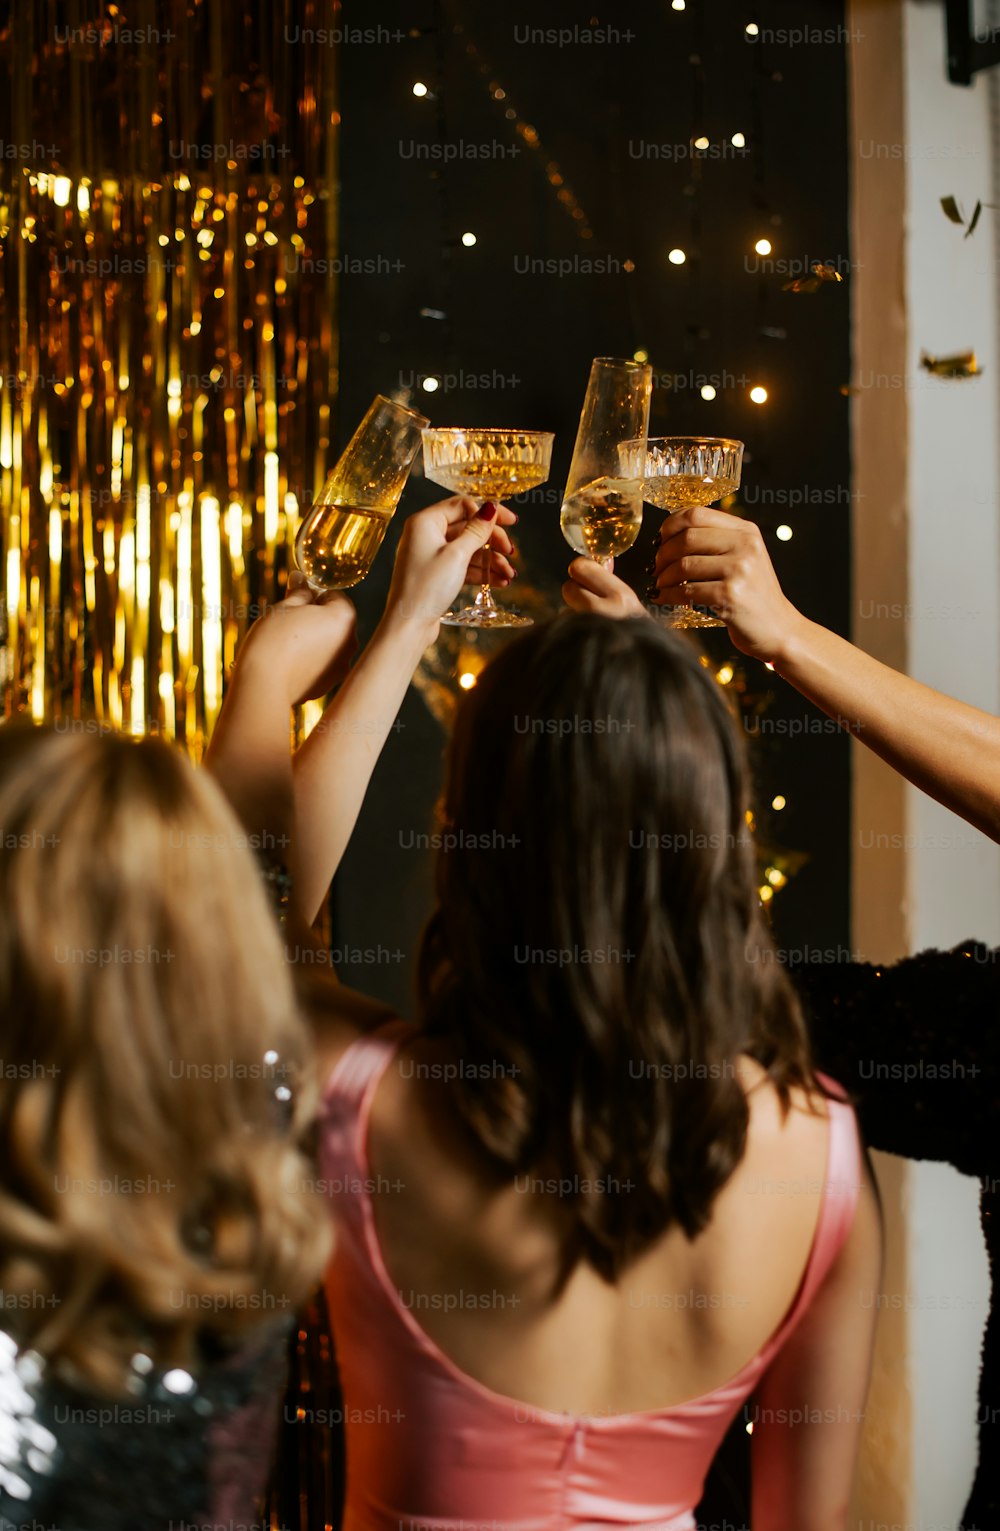 a group of women toasting with wine glasses